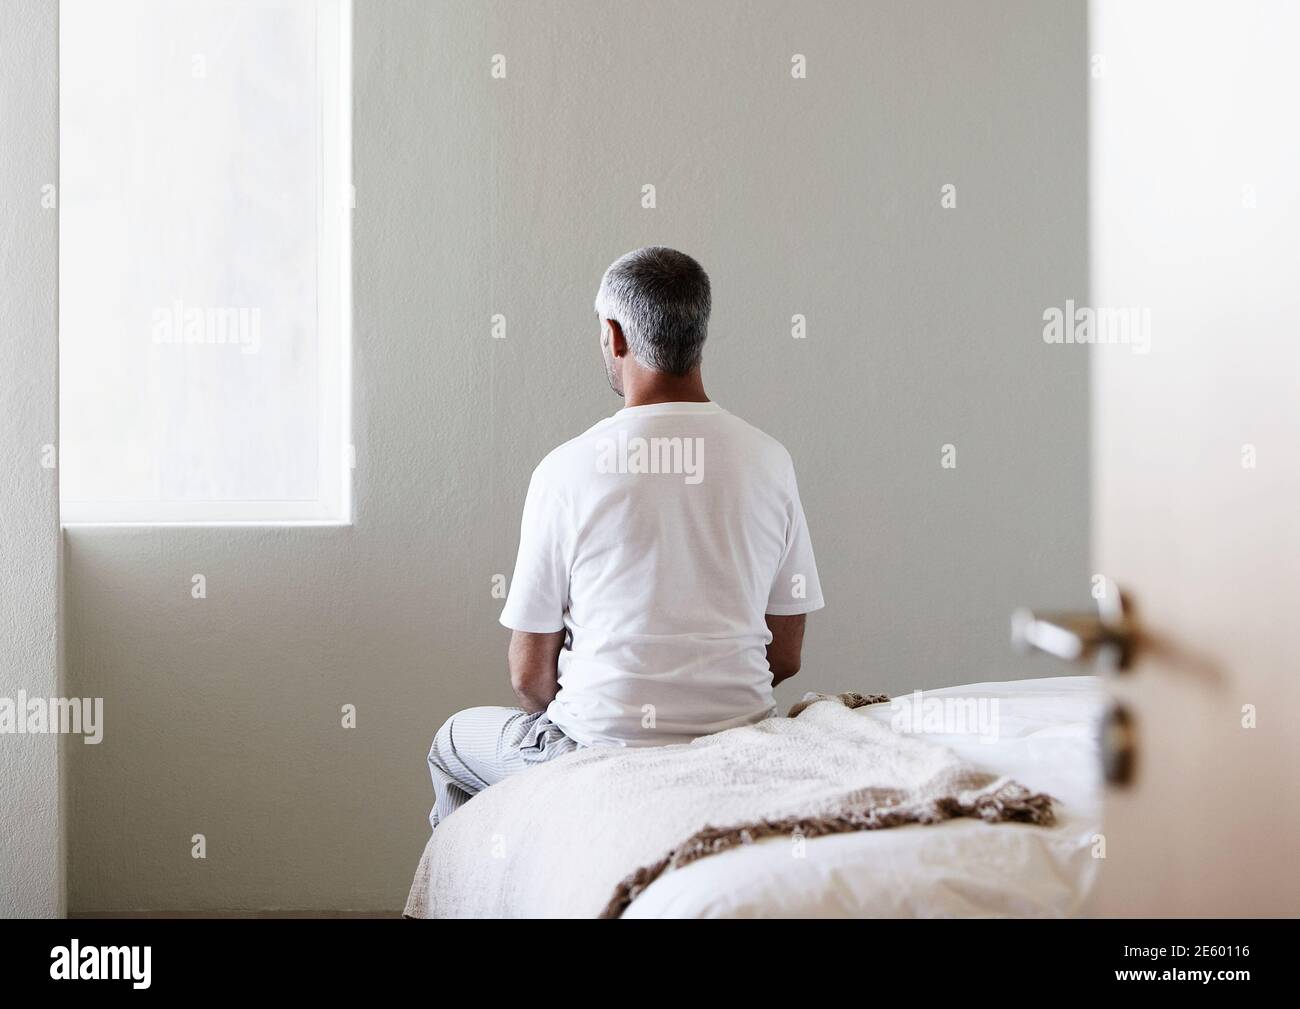 Rear view of middle aged man sitting on edge of bed in bedroom Stock Photo